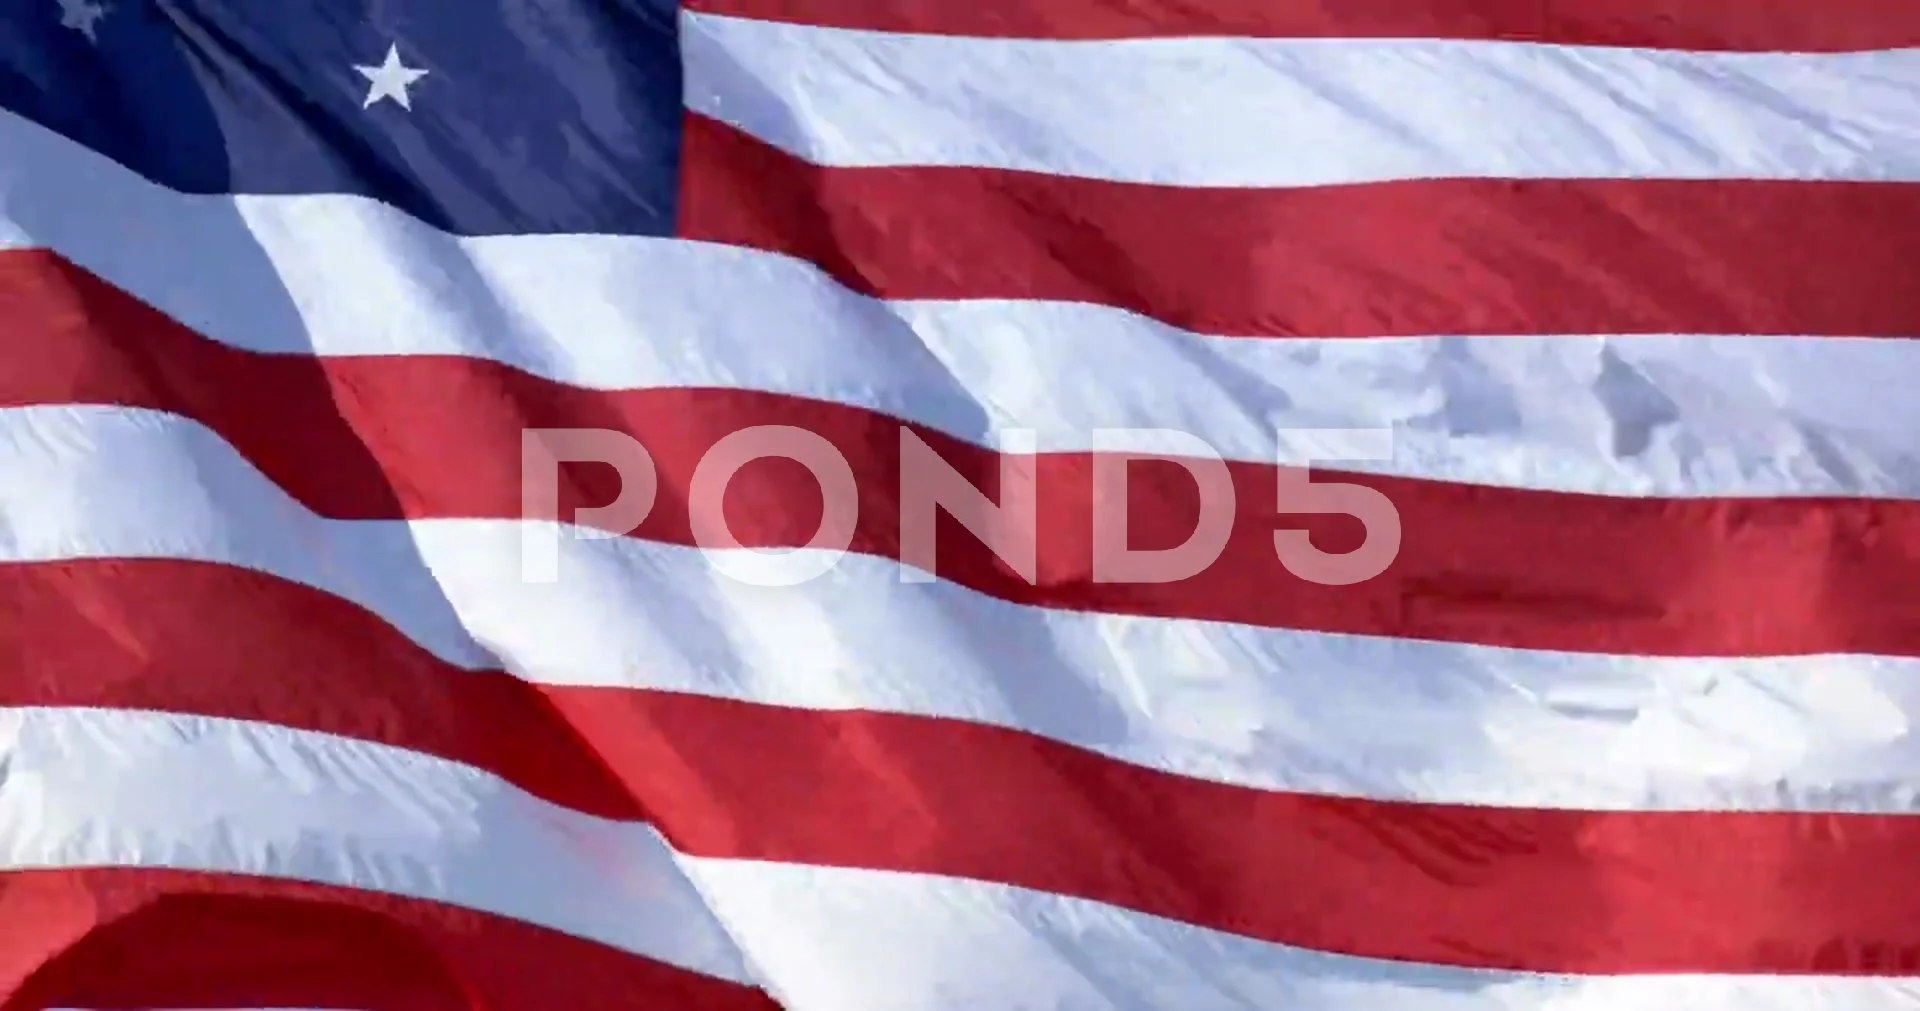 Waving Flag Stock Footage Royalty Free Stock Videos Pond5 - waving flag with roblox logo seamles lo stock video pond5